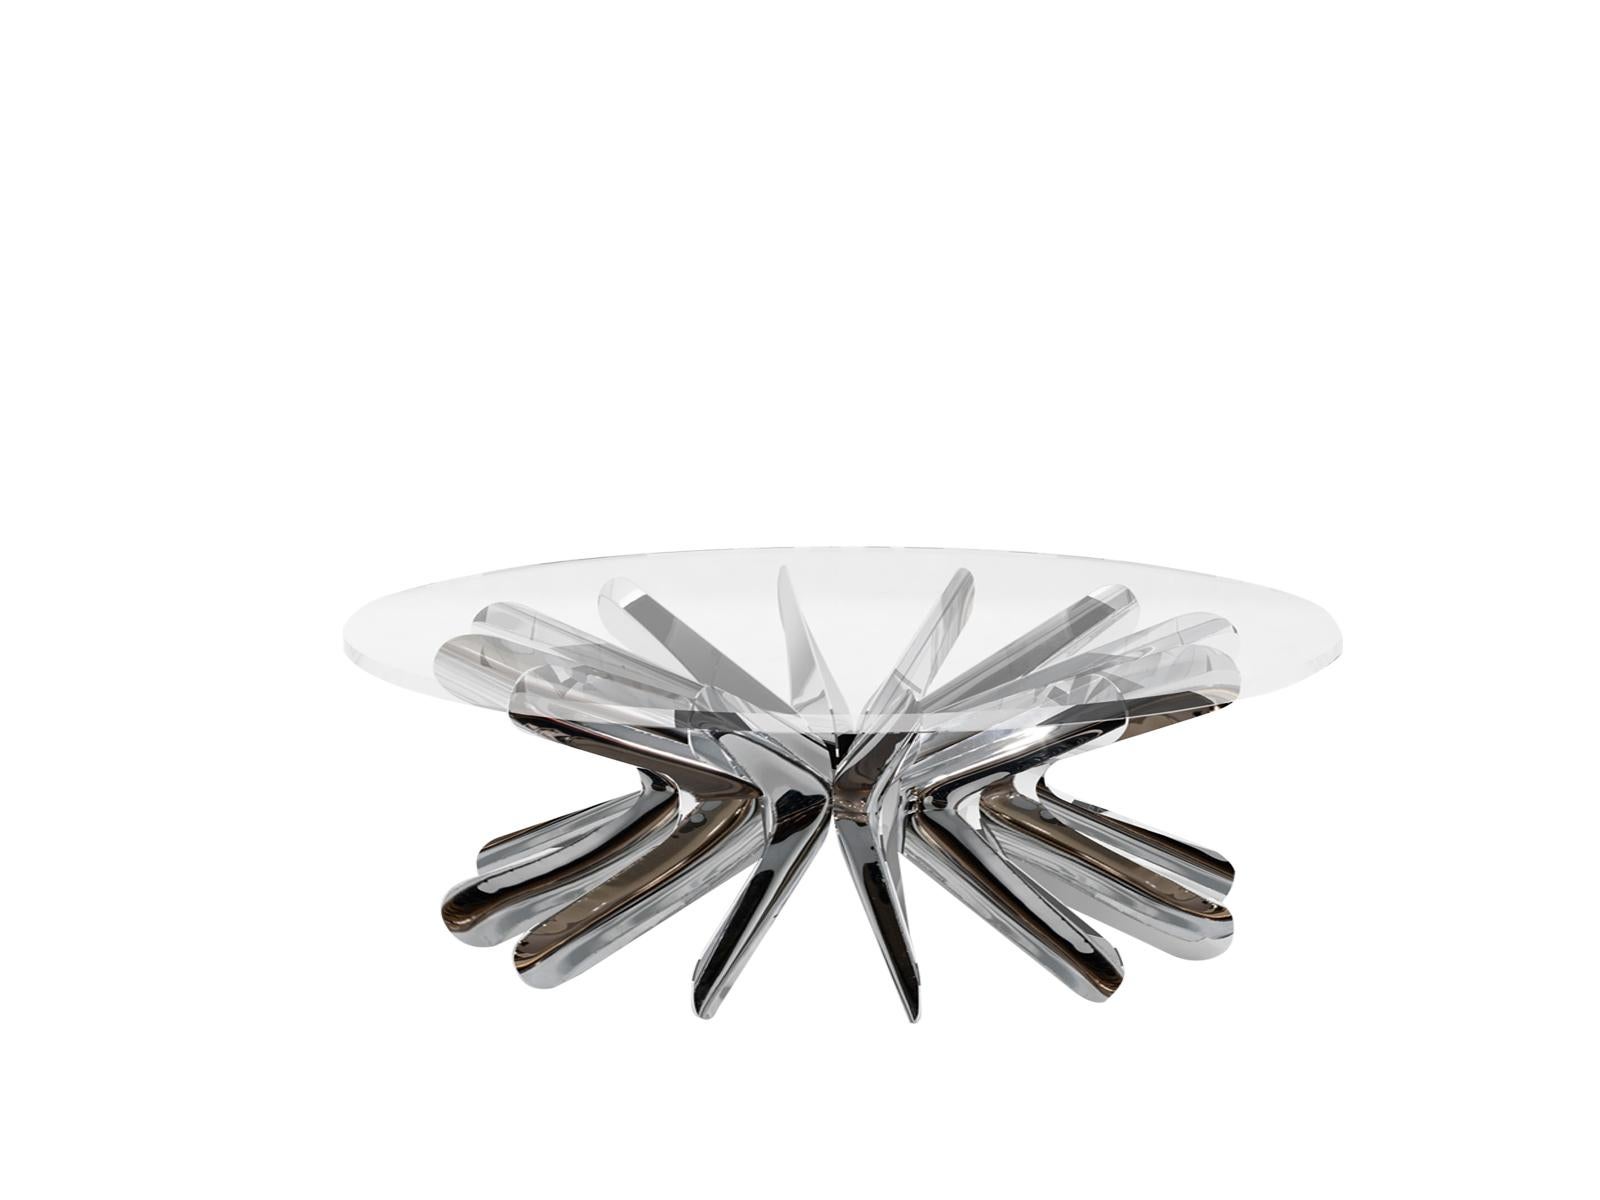 Polish Contemporary Coffee Table 'Steel in Rotation No. 1' by Zieta, Large, White Matt For Sale